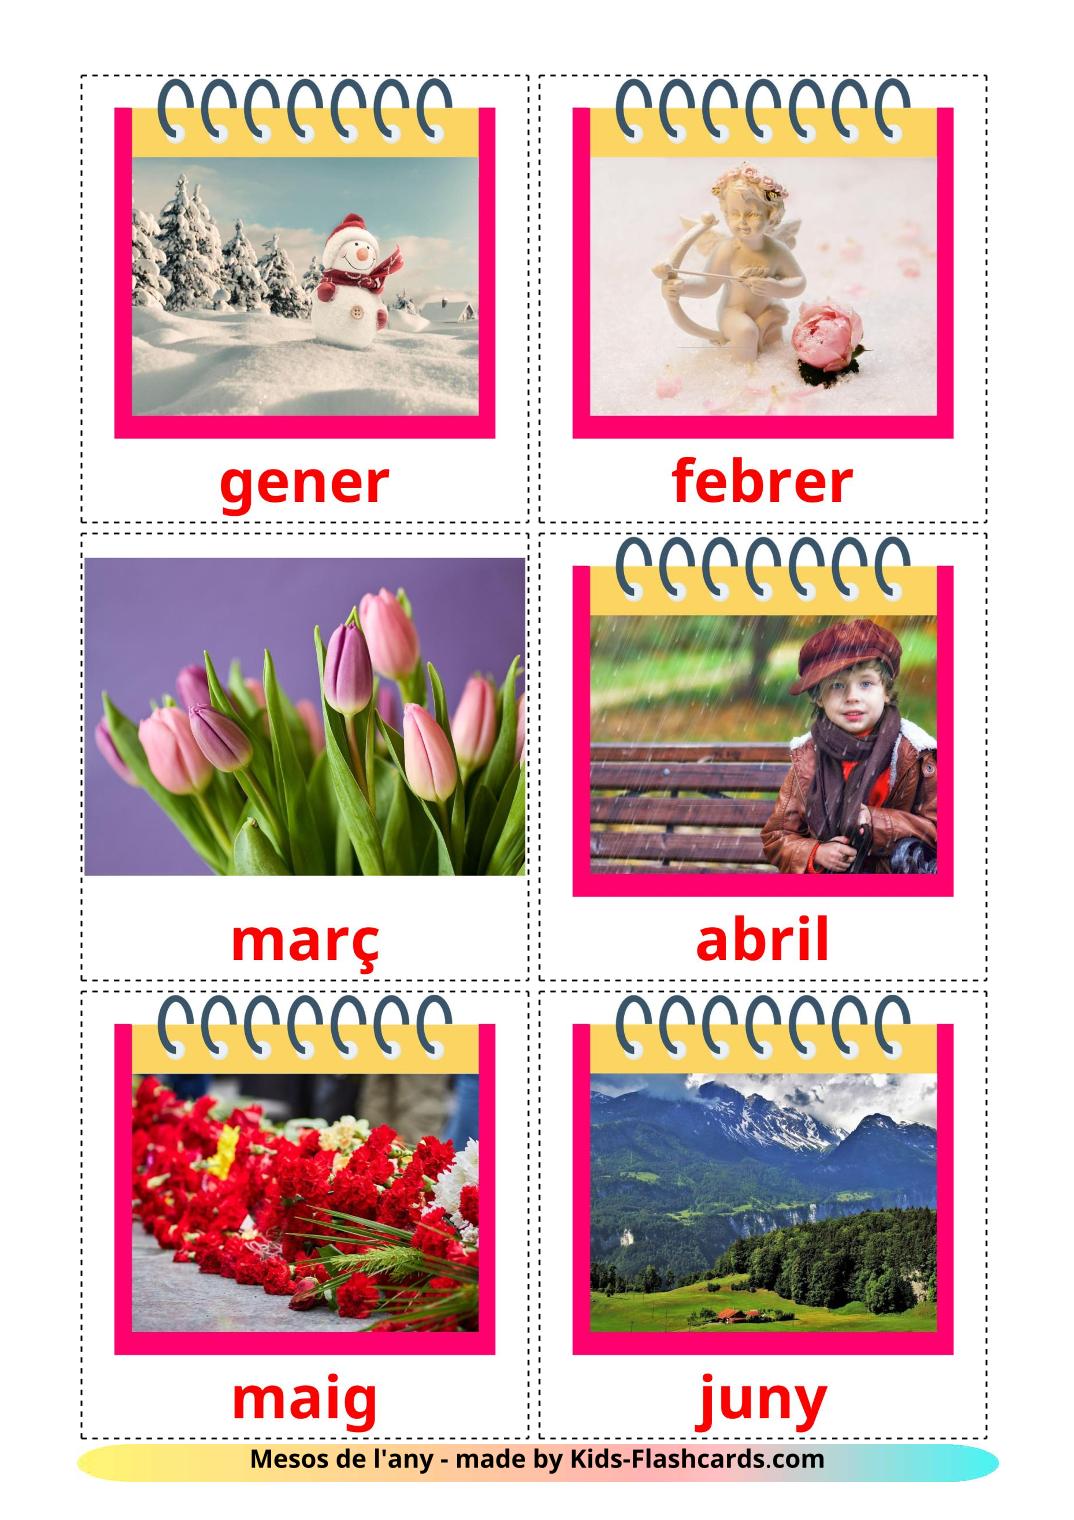 Months of the Year - 12 Free Printable catalan Flashcards 